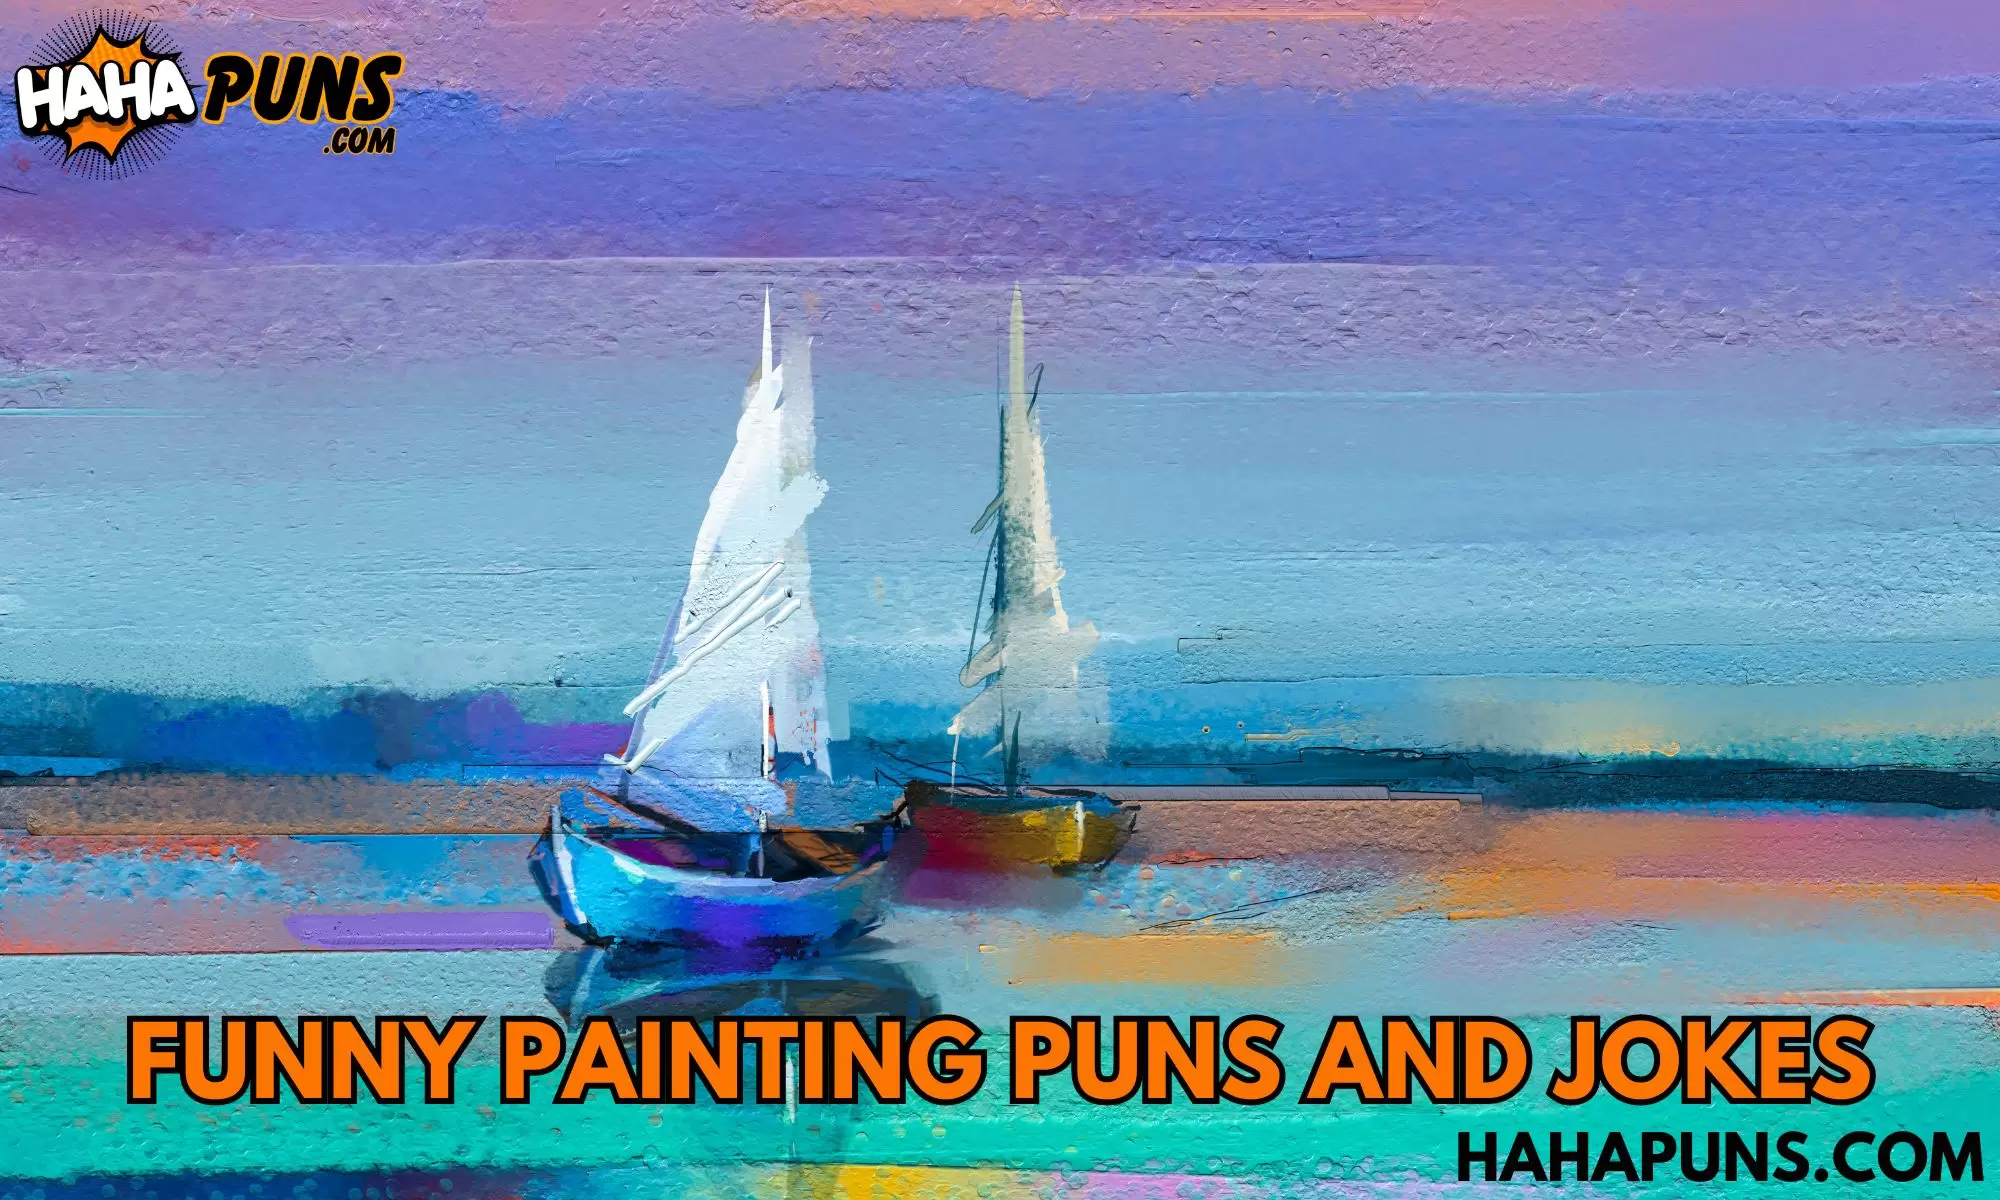 Funny Painting Puns And Jokes